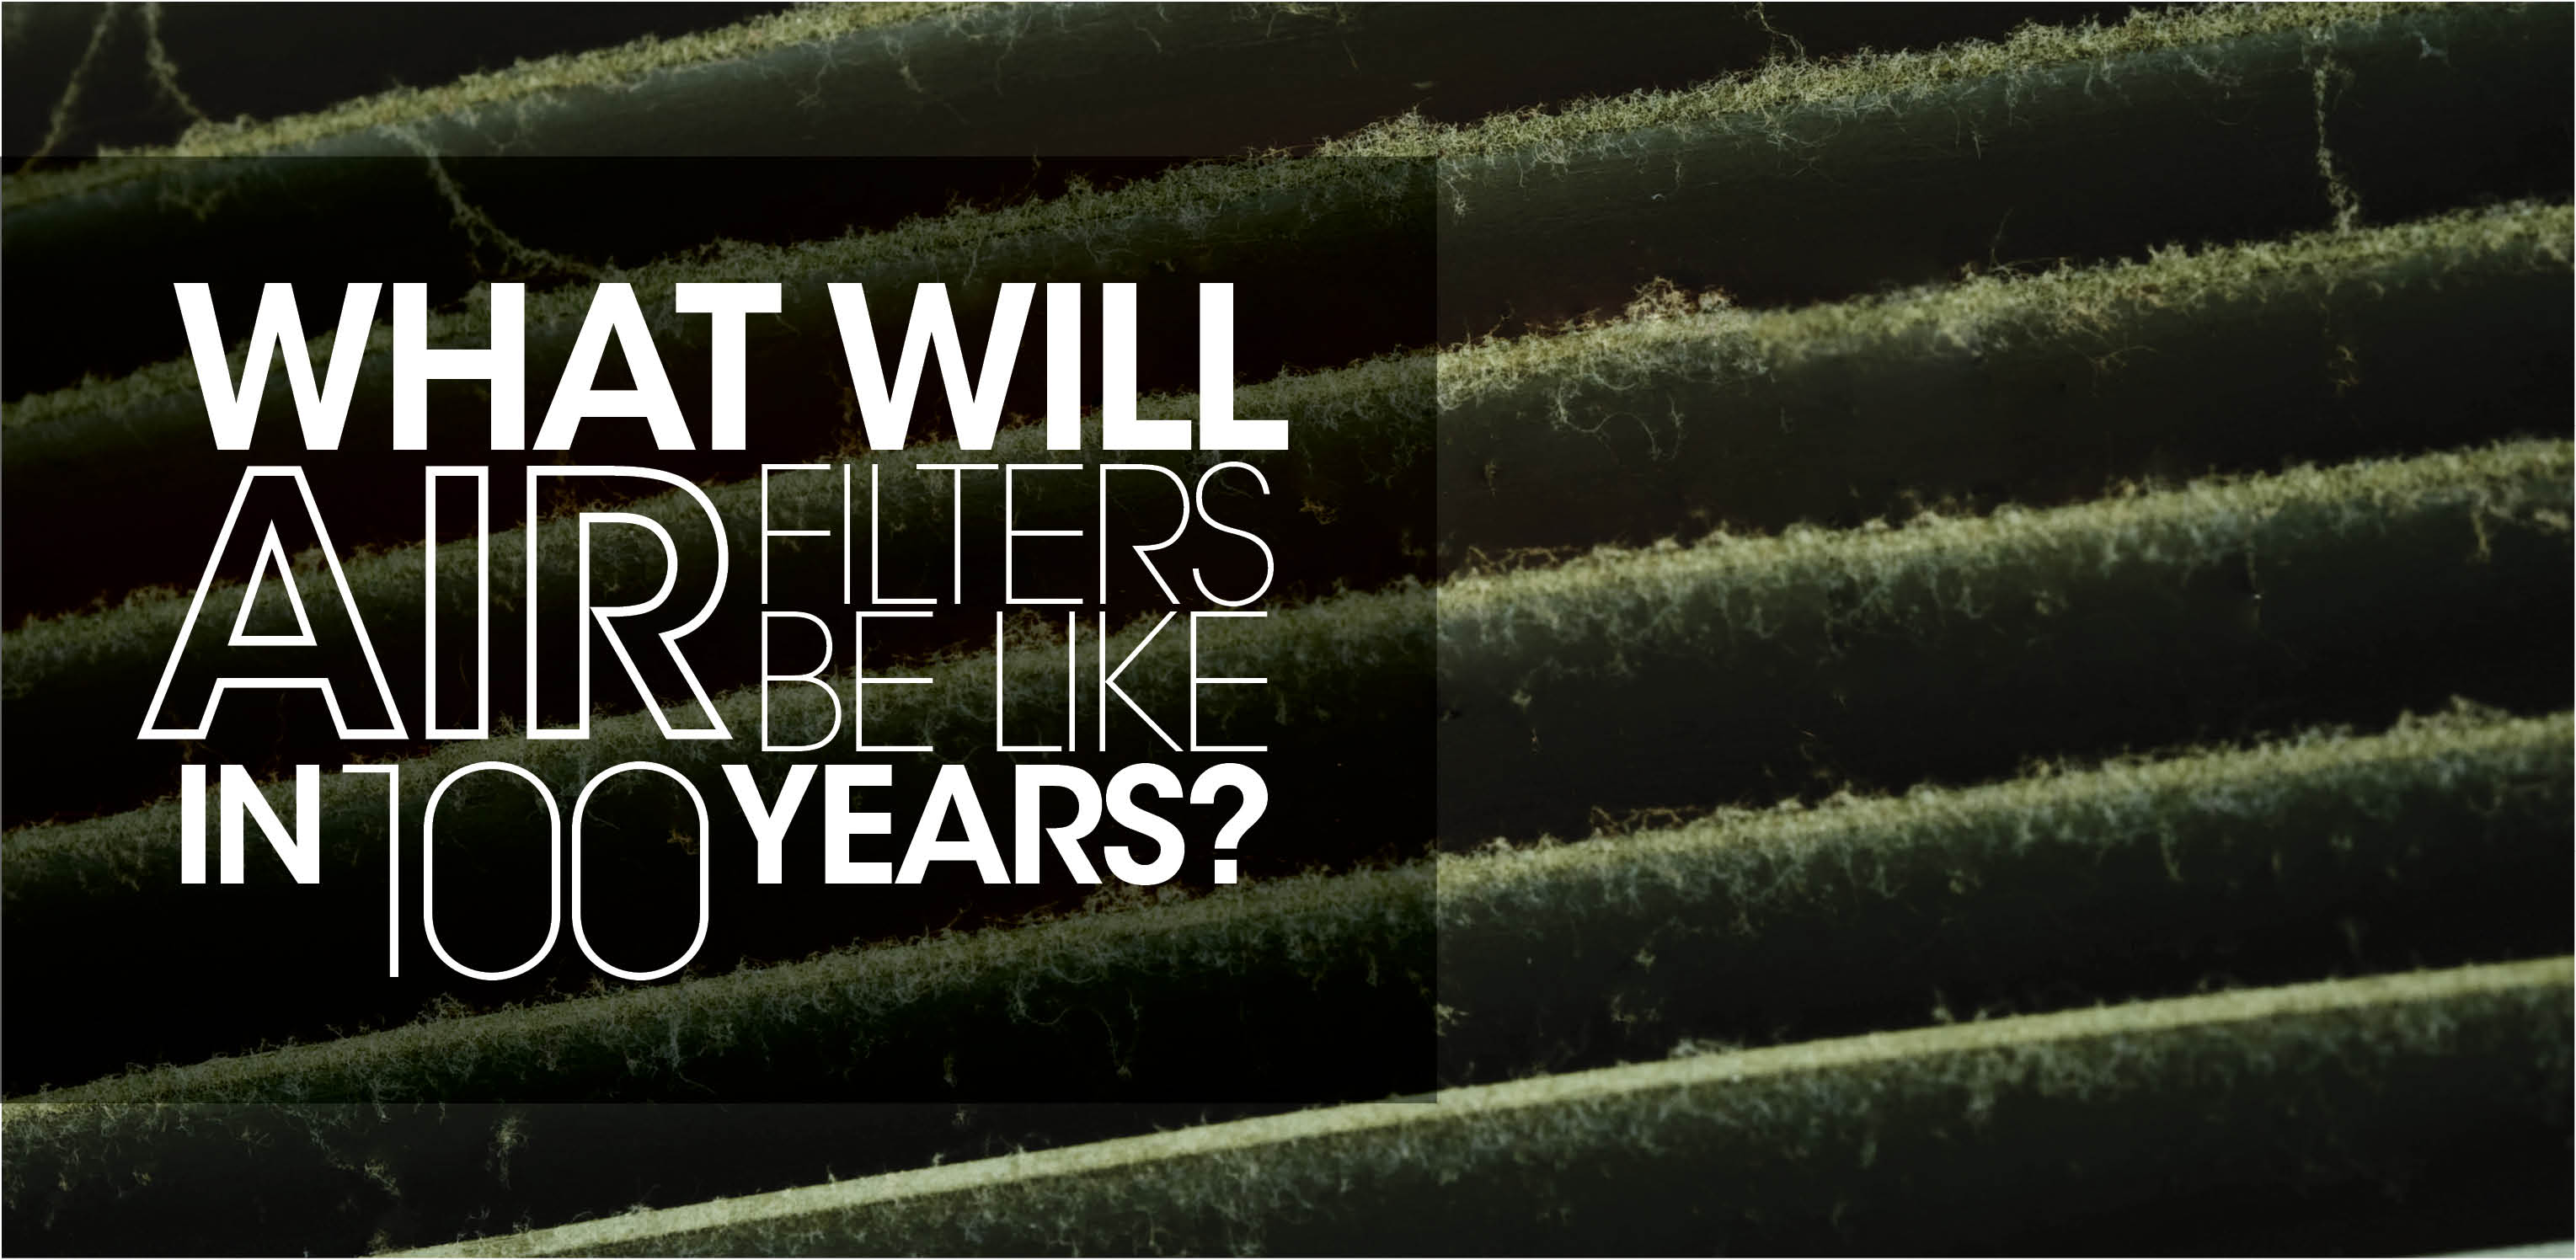 Blog title "What will air filters be like in 100 years" superimposed over a picture of a dirty air filter